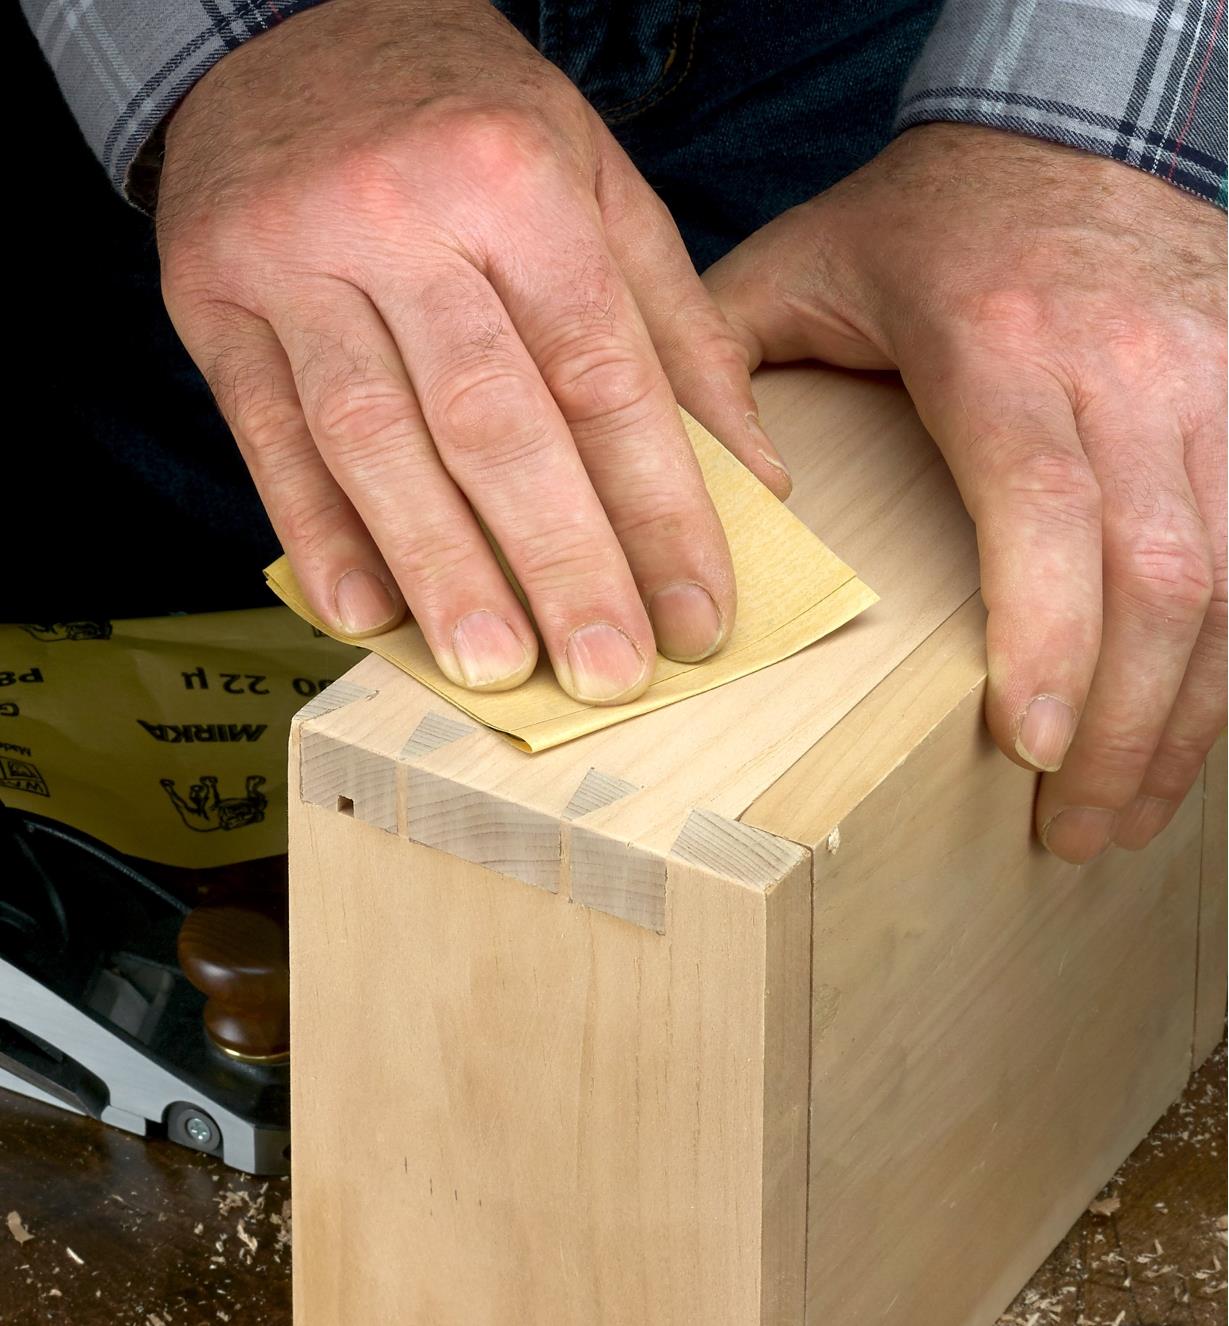 A woodworker uses Mirka Gold sandpaper to sand the dovetailed corner of a wooden box